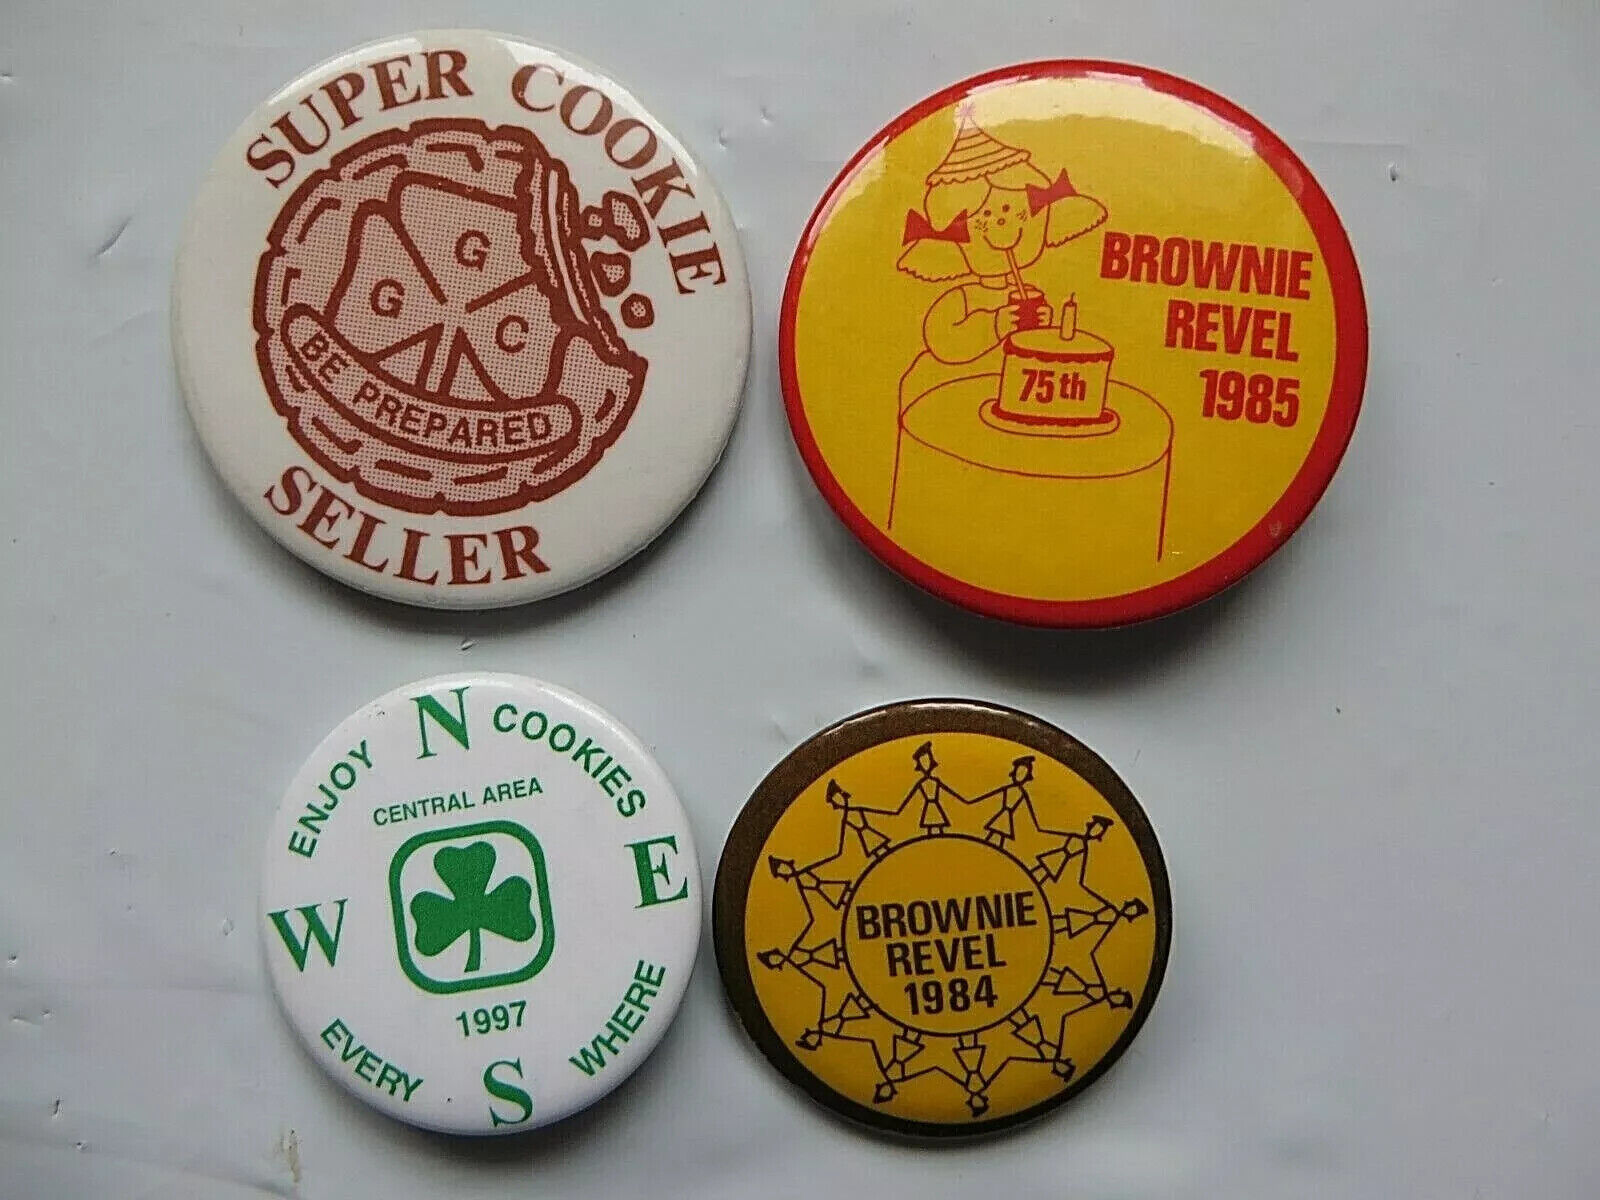 Vtg Girl Guides Brownie Button lot Revel 1984 85 pins Super cookie seller